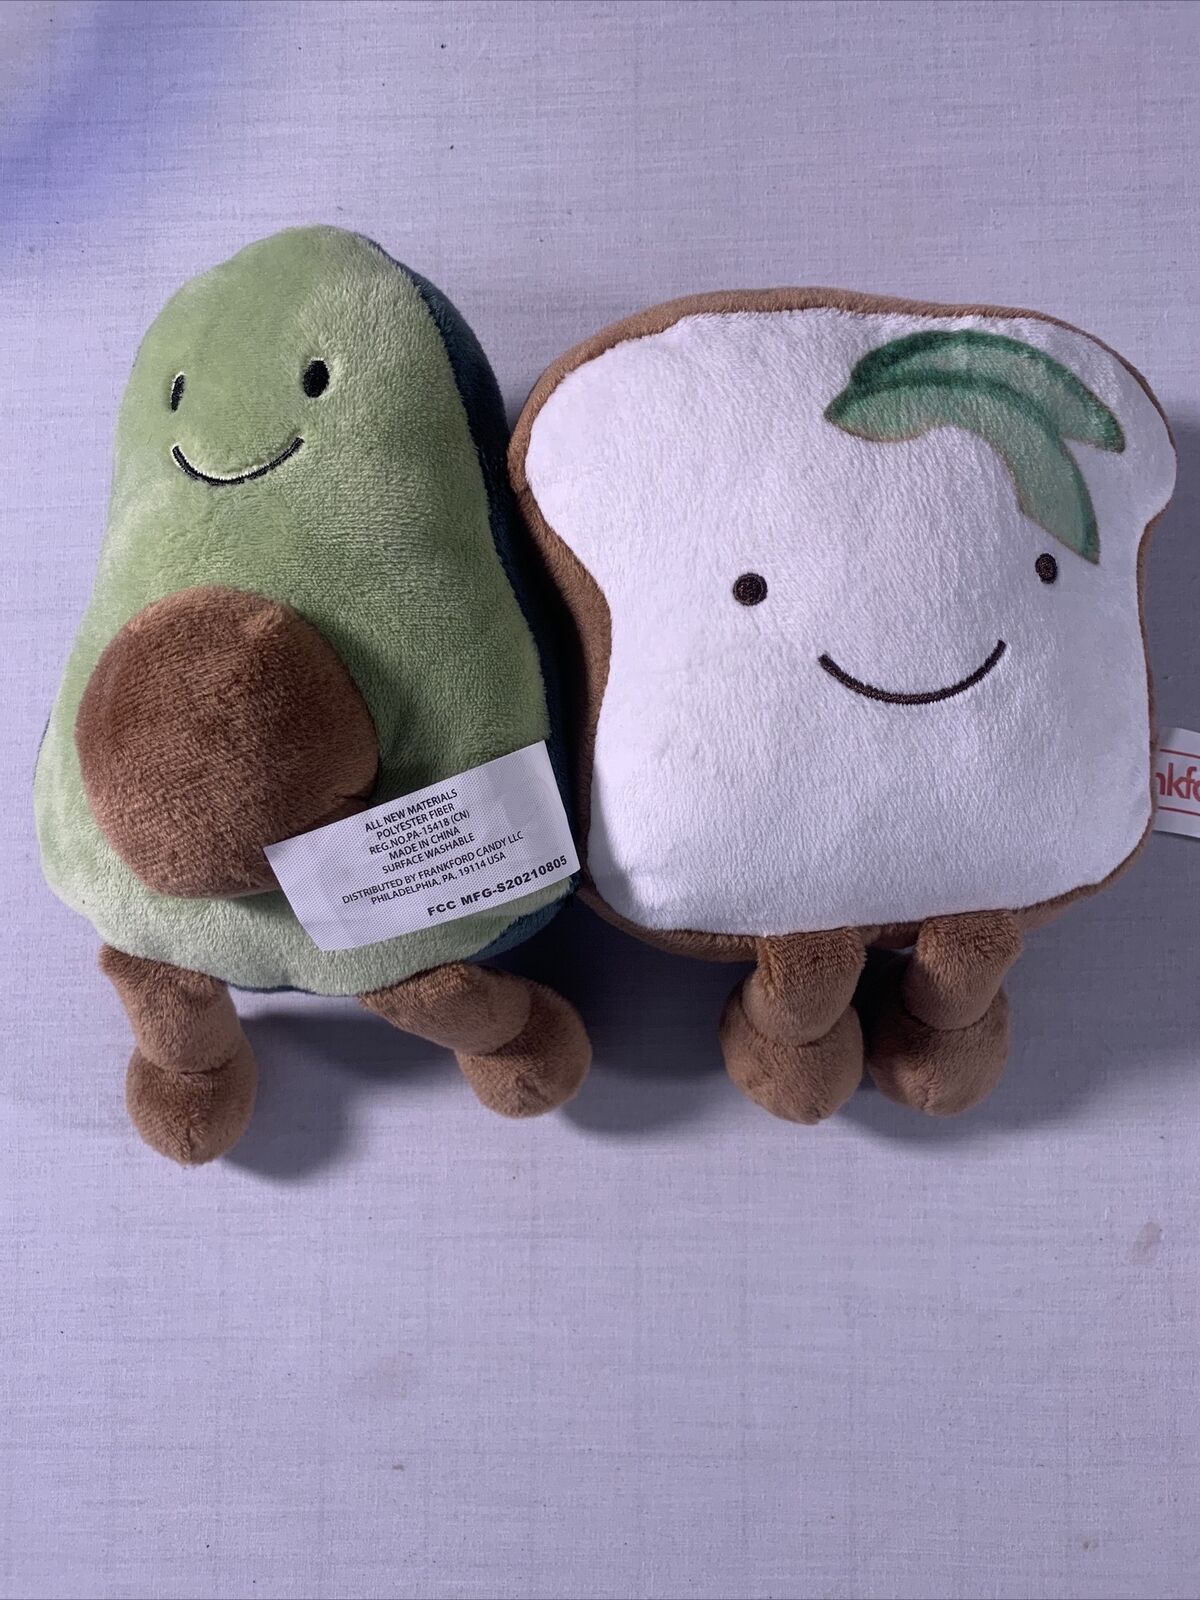 Frankford Valentine Plush Figure - You Are The Avocado To My Toast - Pair